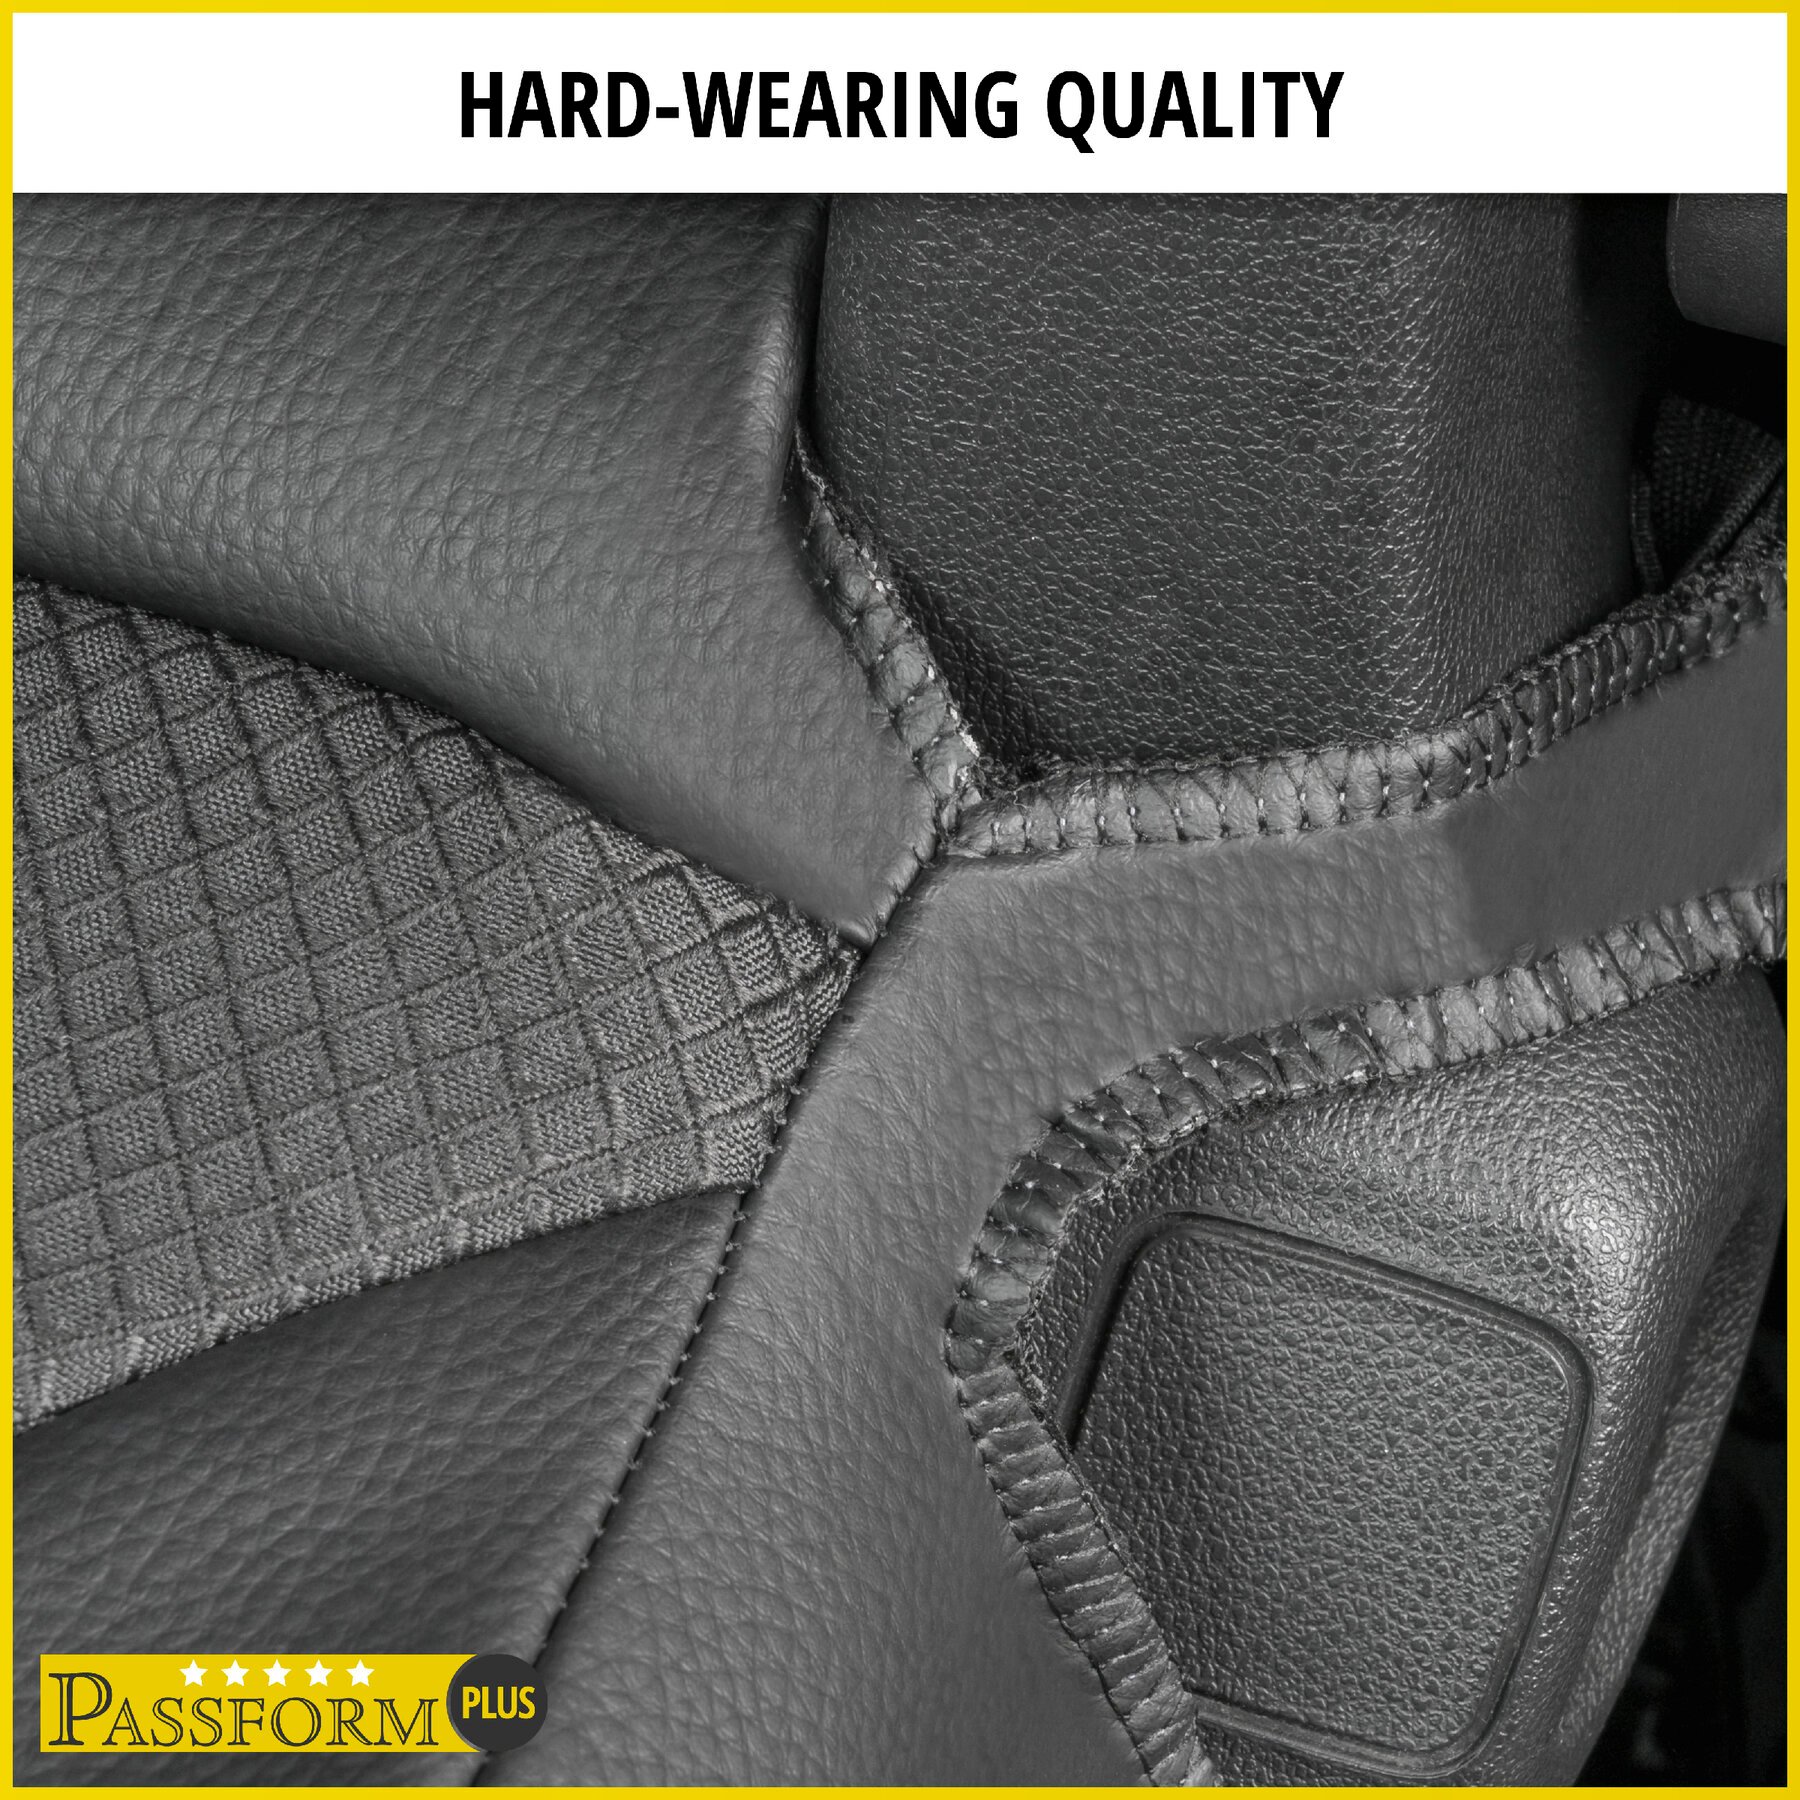 Premium Seat Cover for Peugeot Expert 2016-Today, 2 single seat covers front + 2 armrest covers